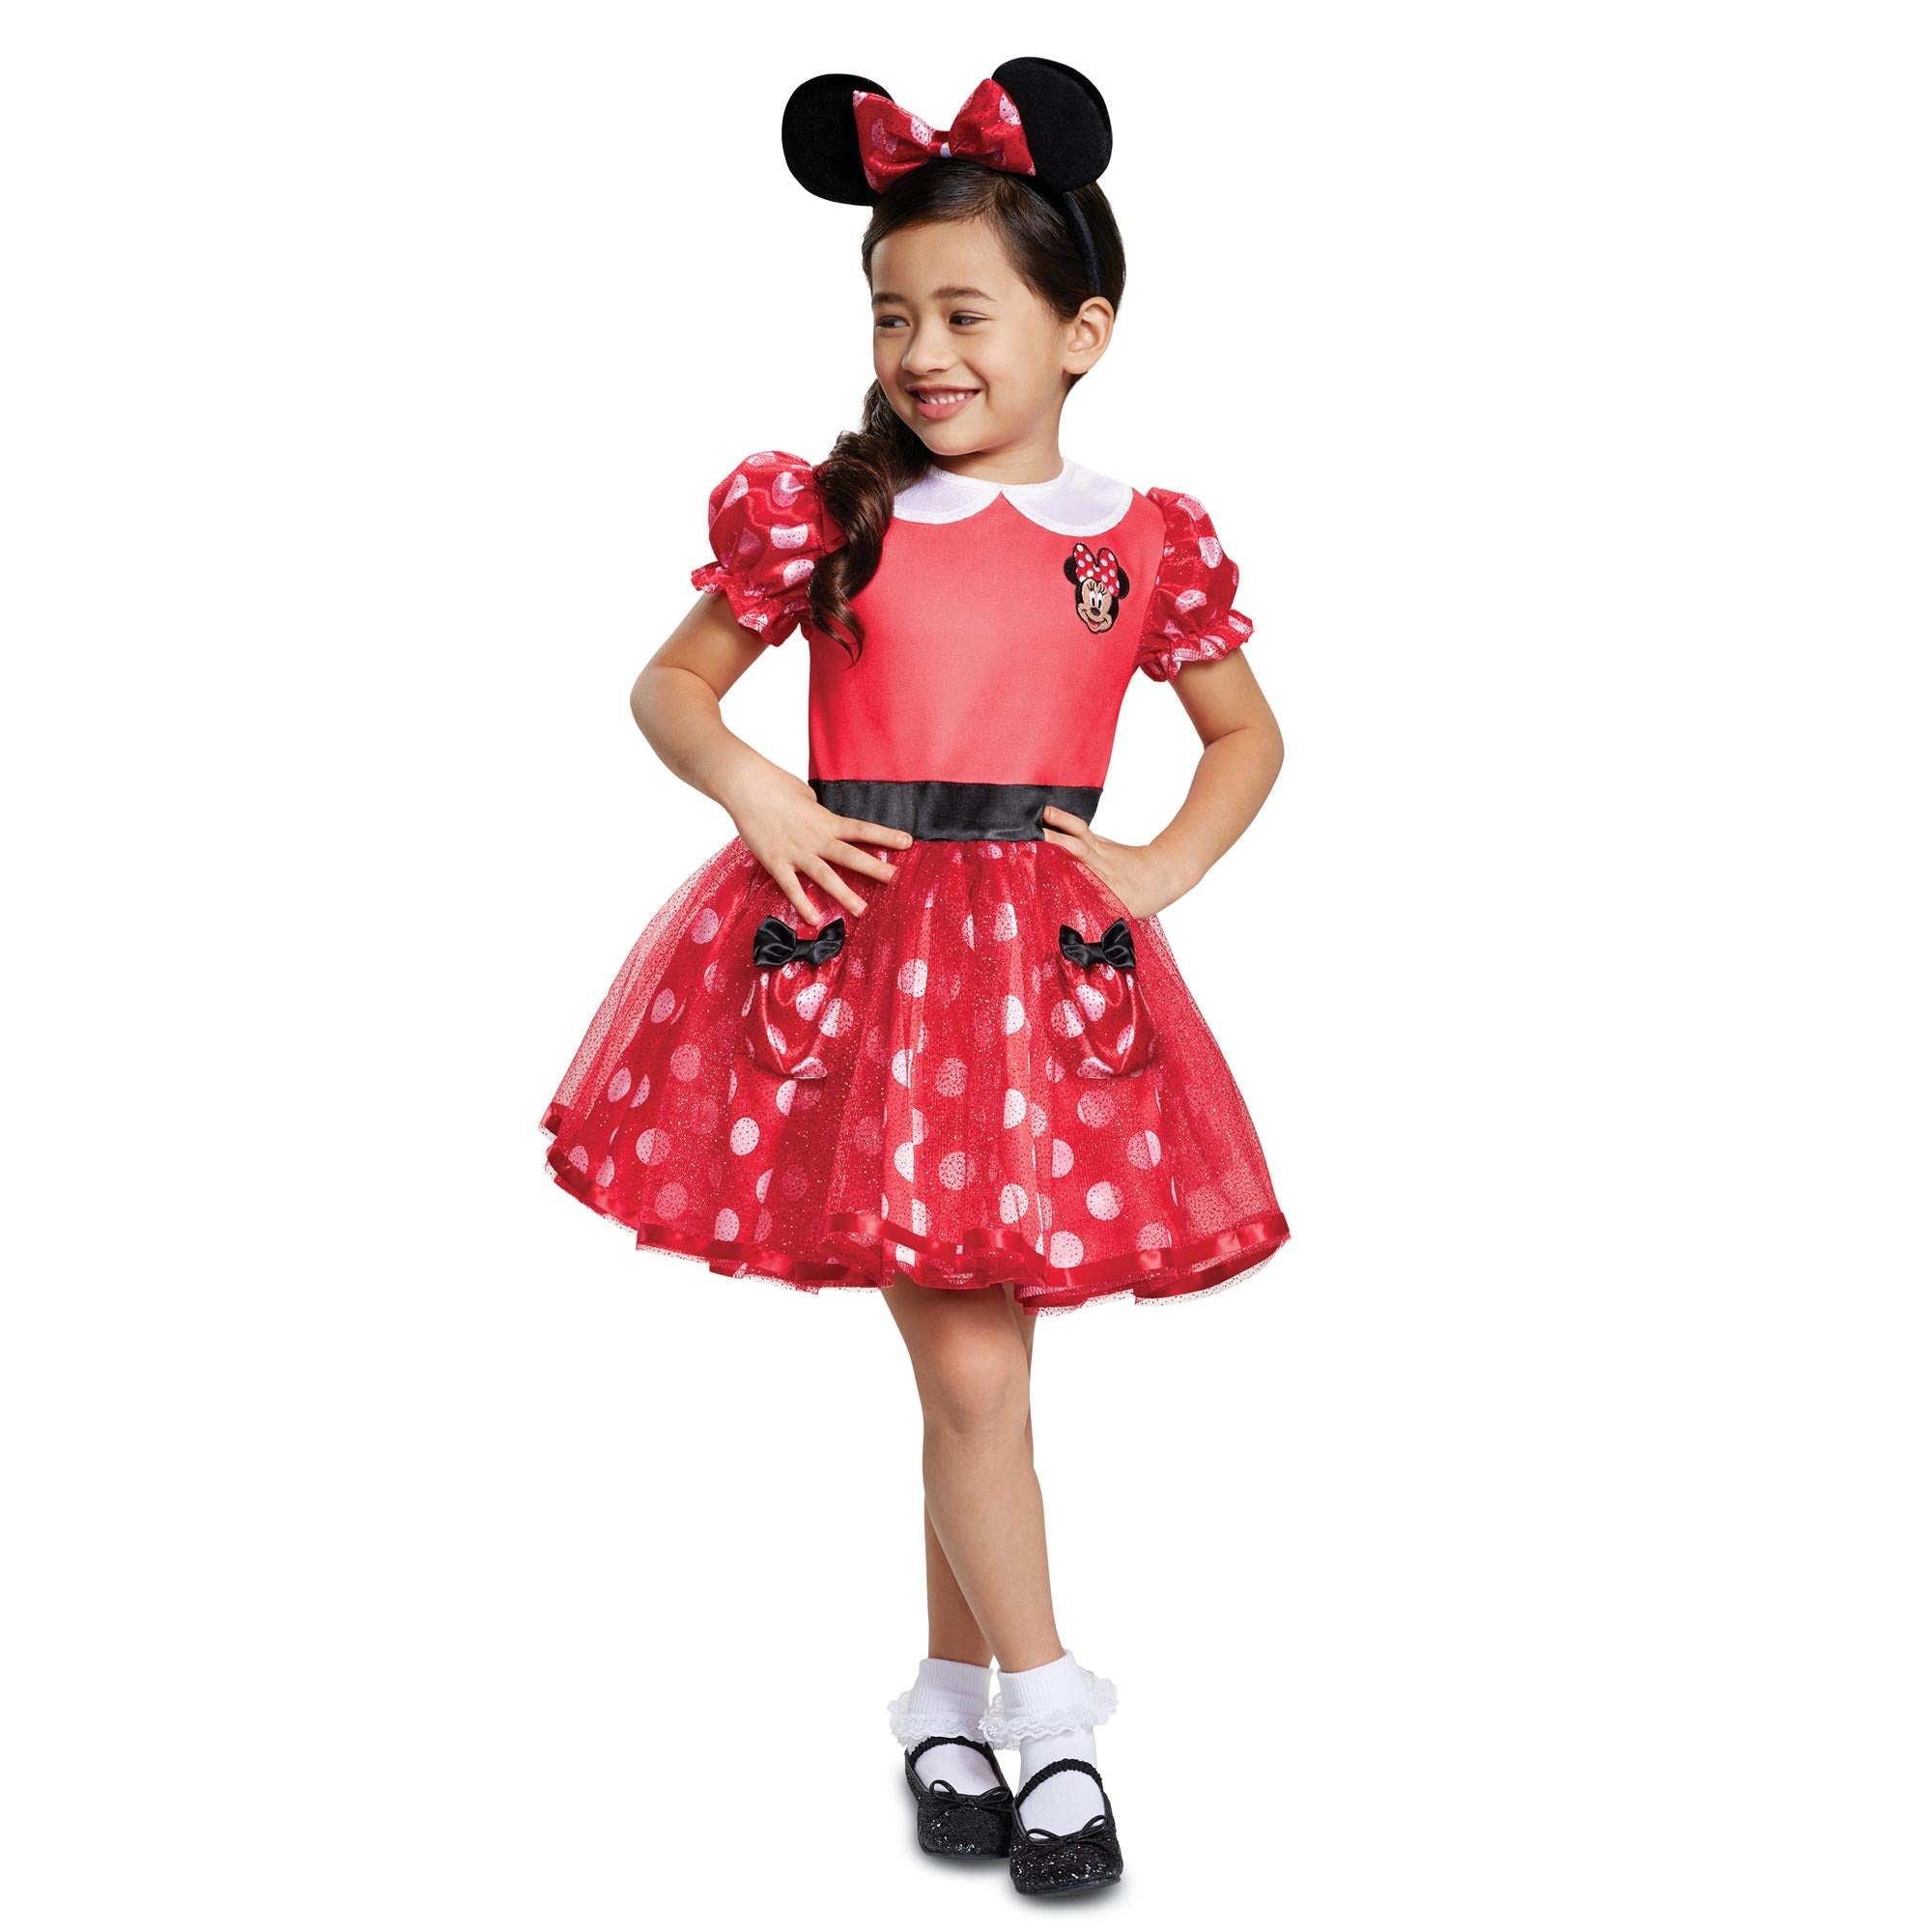 Top 15 Disney Costume Ideas for Girls - Party Centre